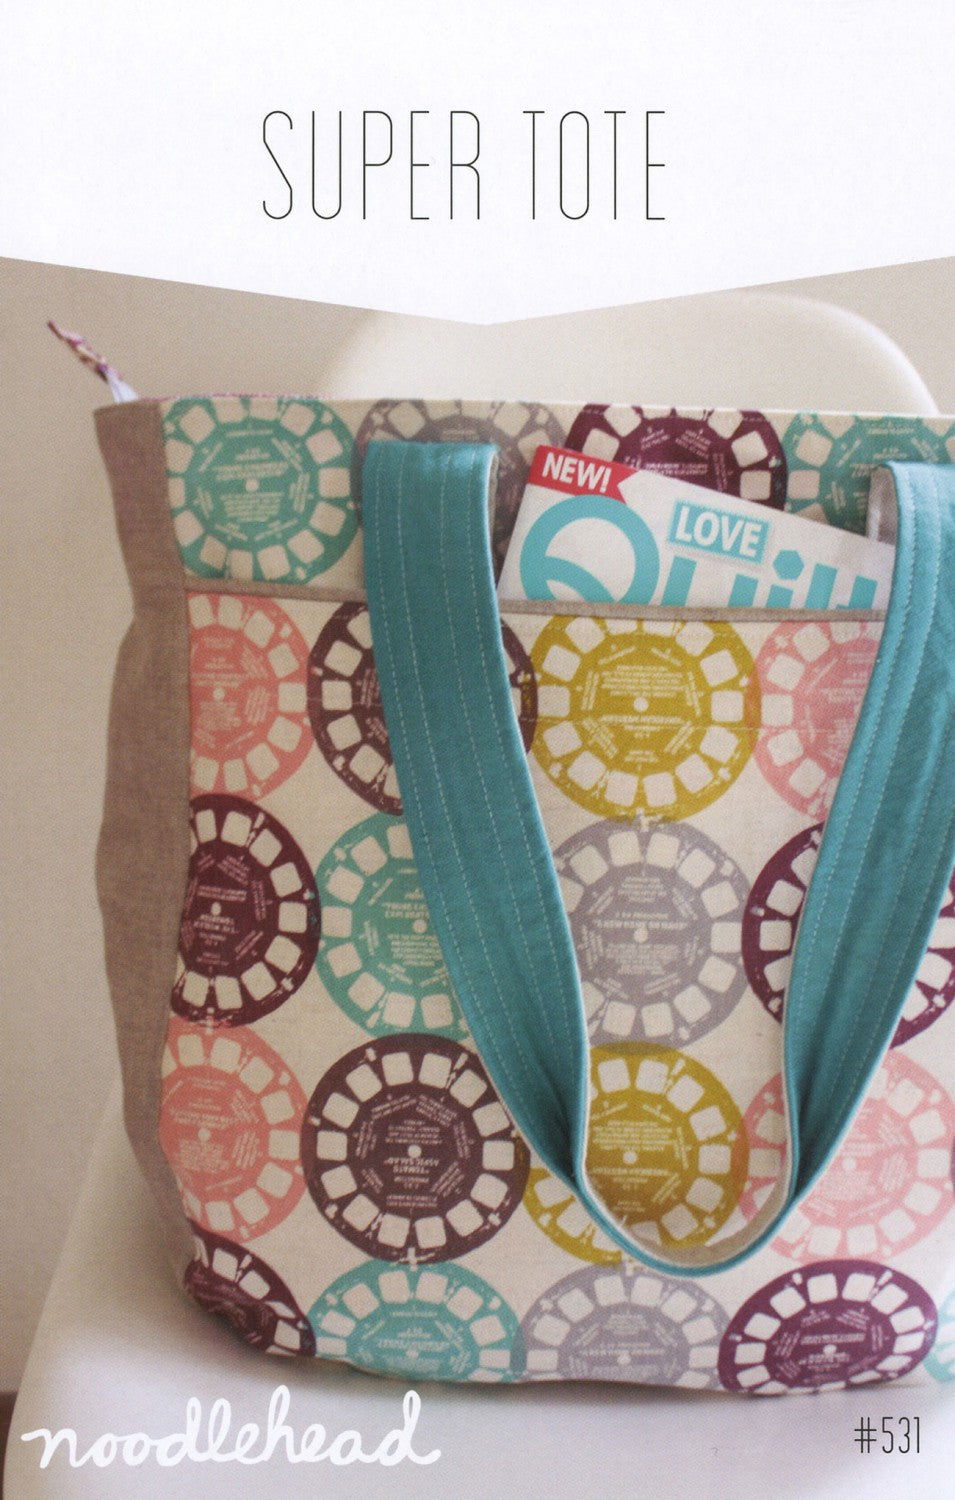 Super Tote by Anna Graham of Noodlehead - PAPER Pattern